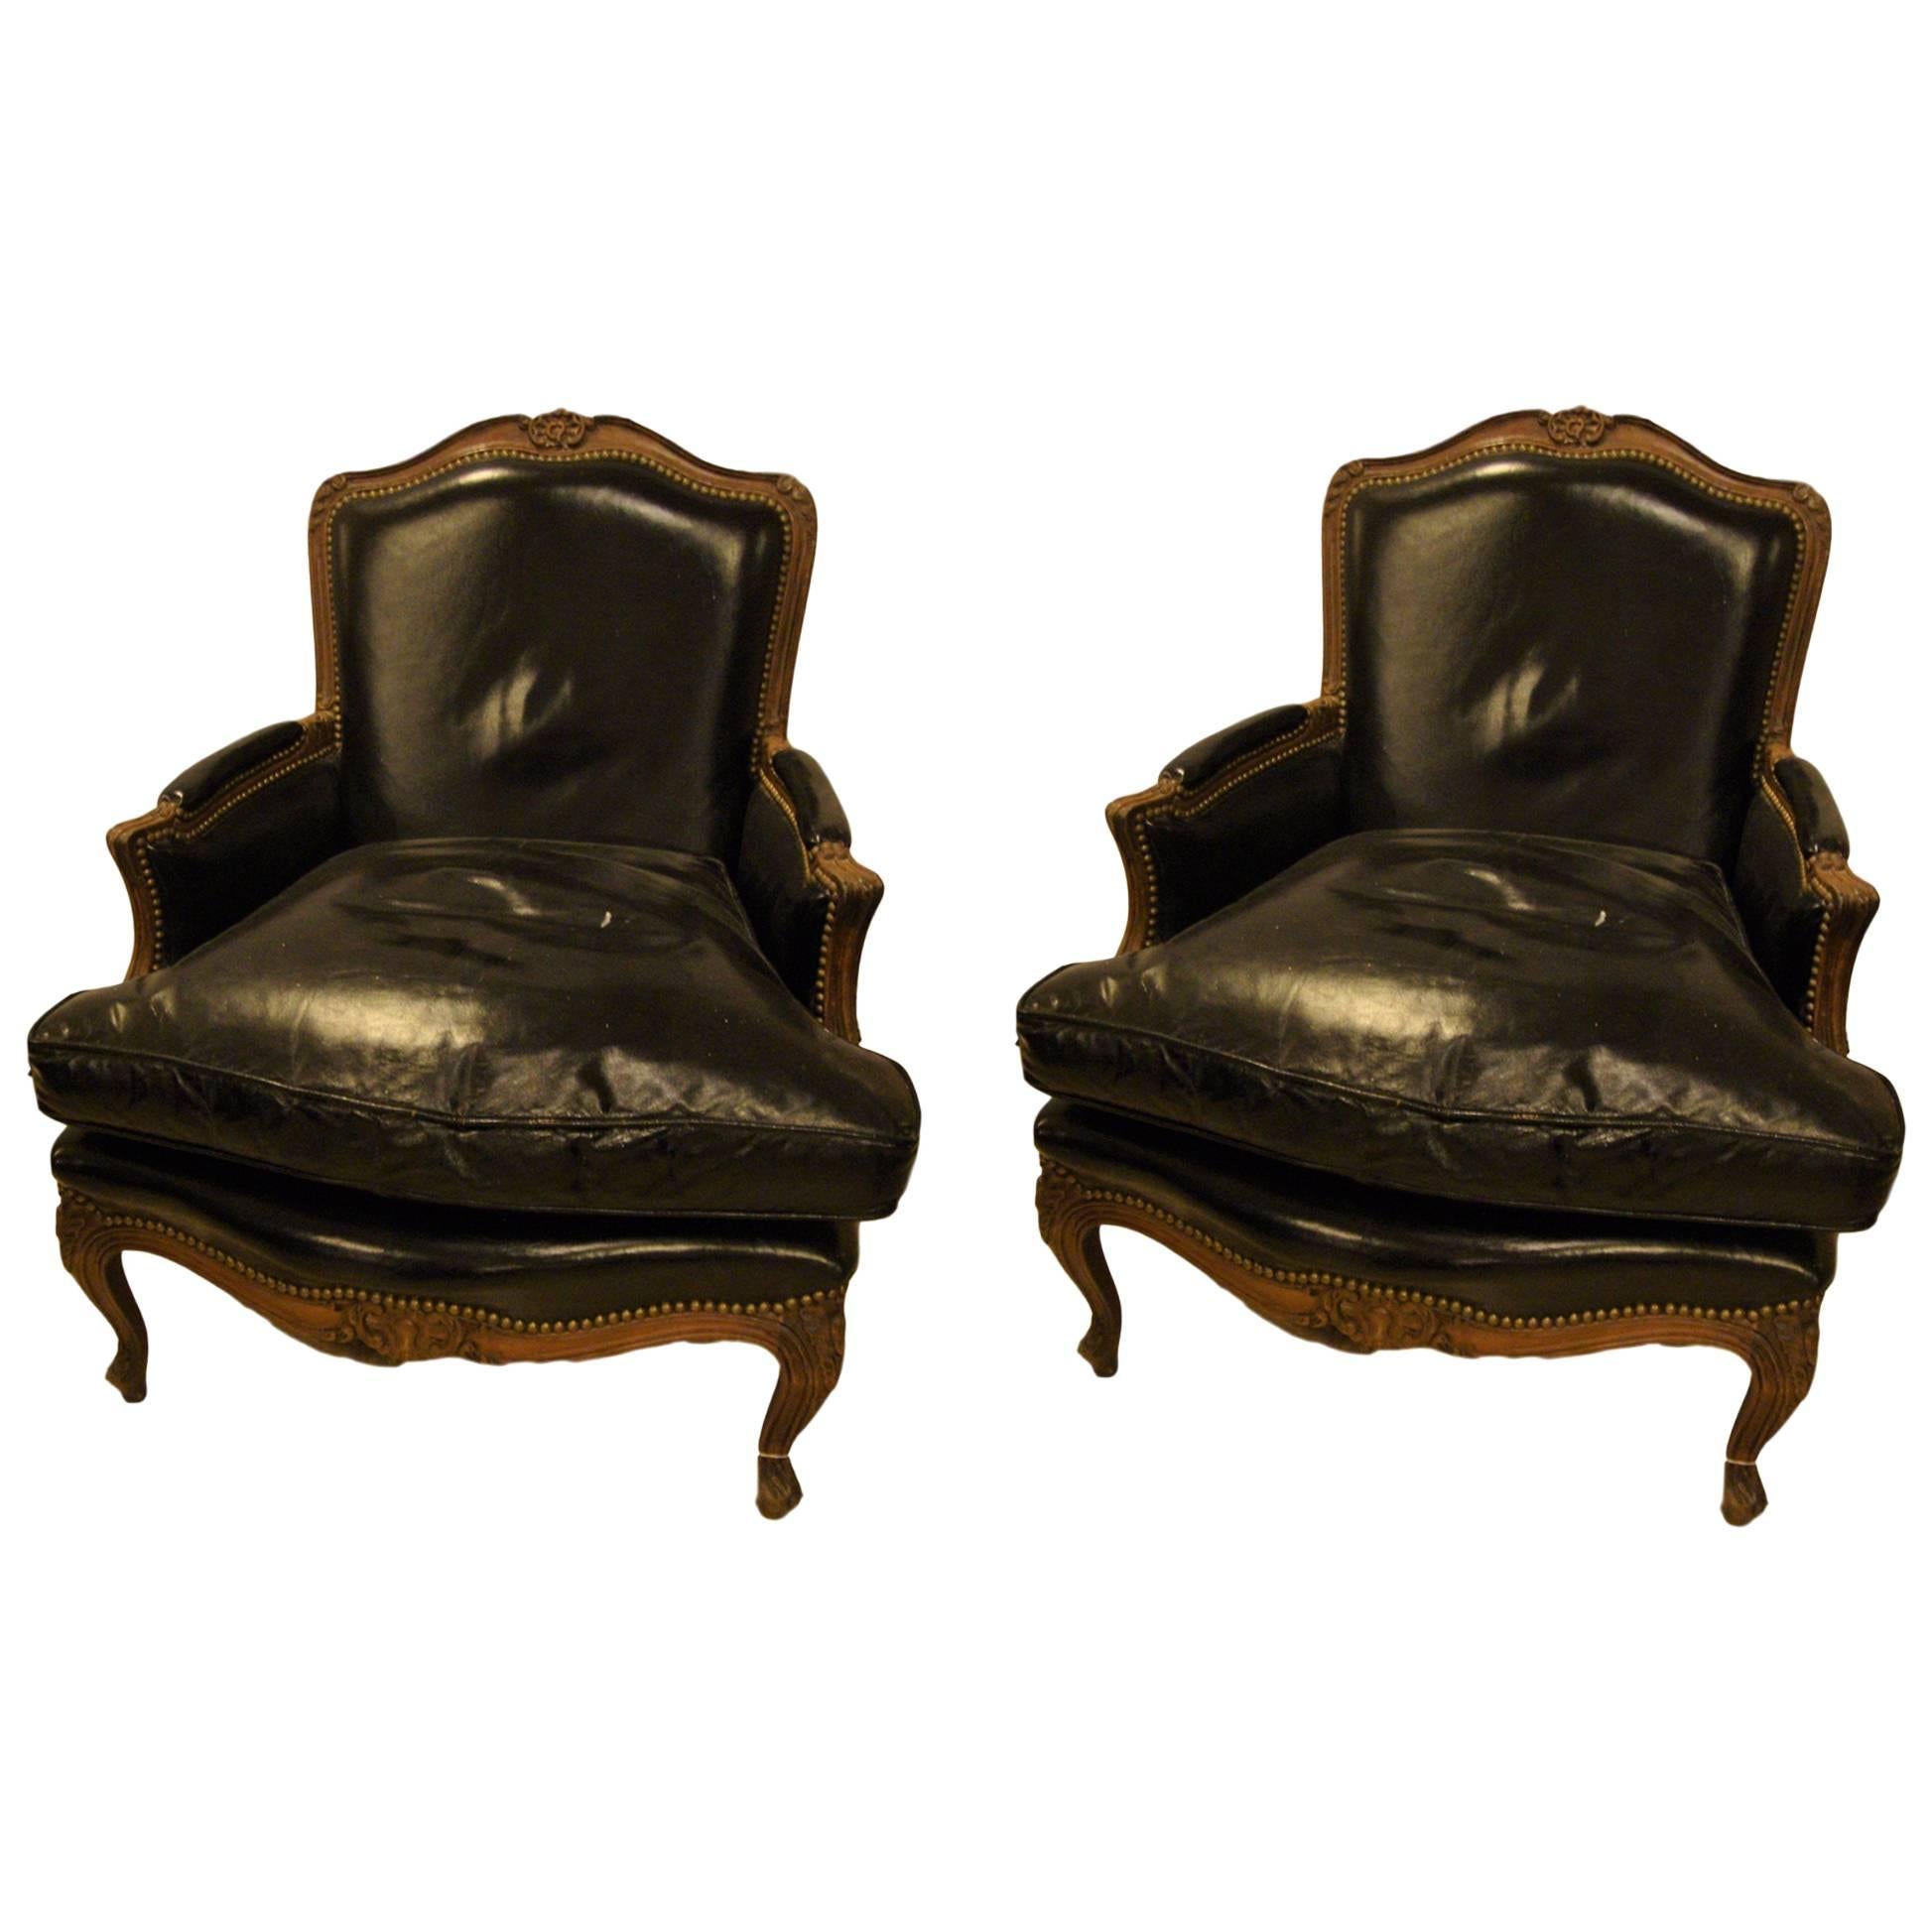 Pair of Bergère or Lounge Chairs in Louis XV Style Attributed to Maison Jansen